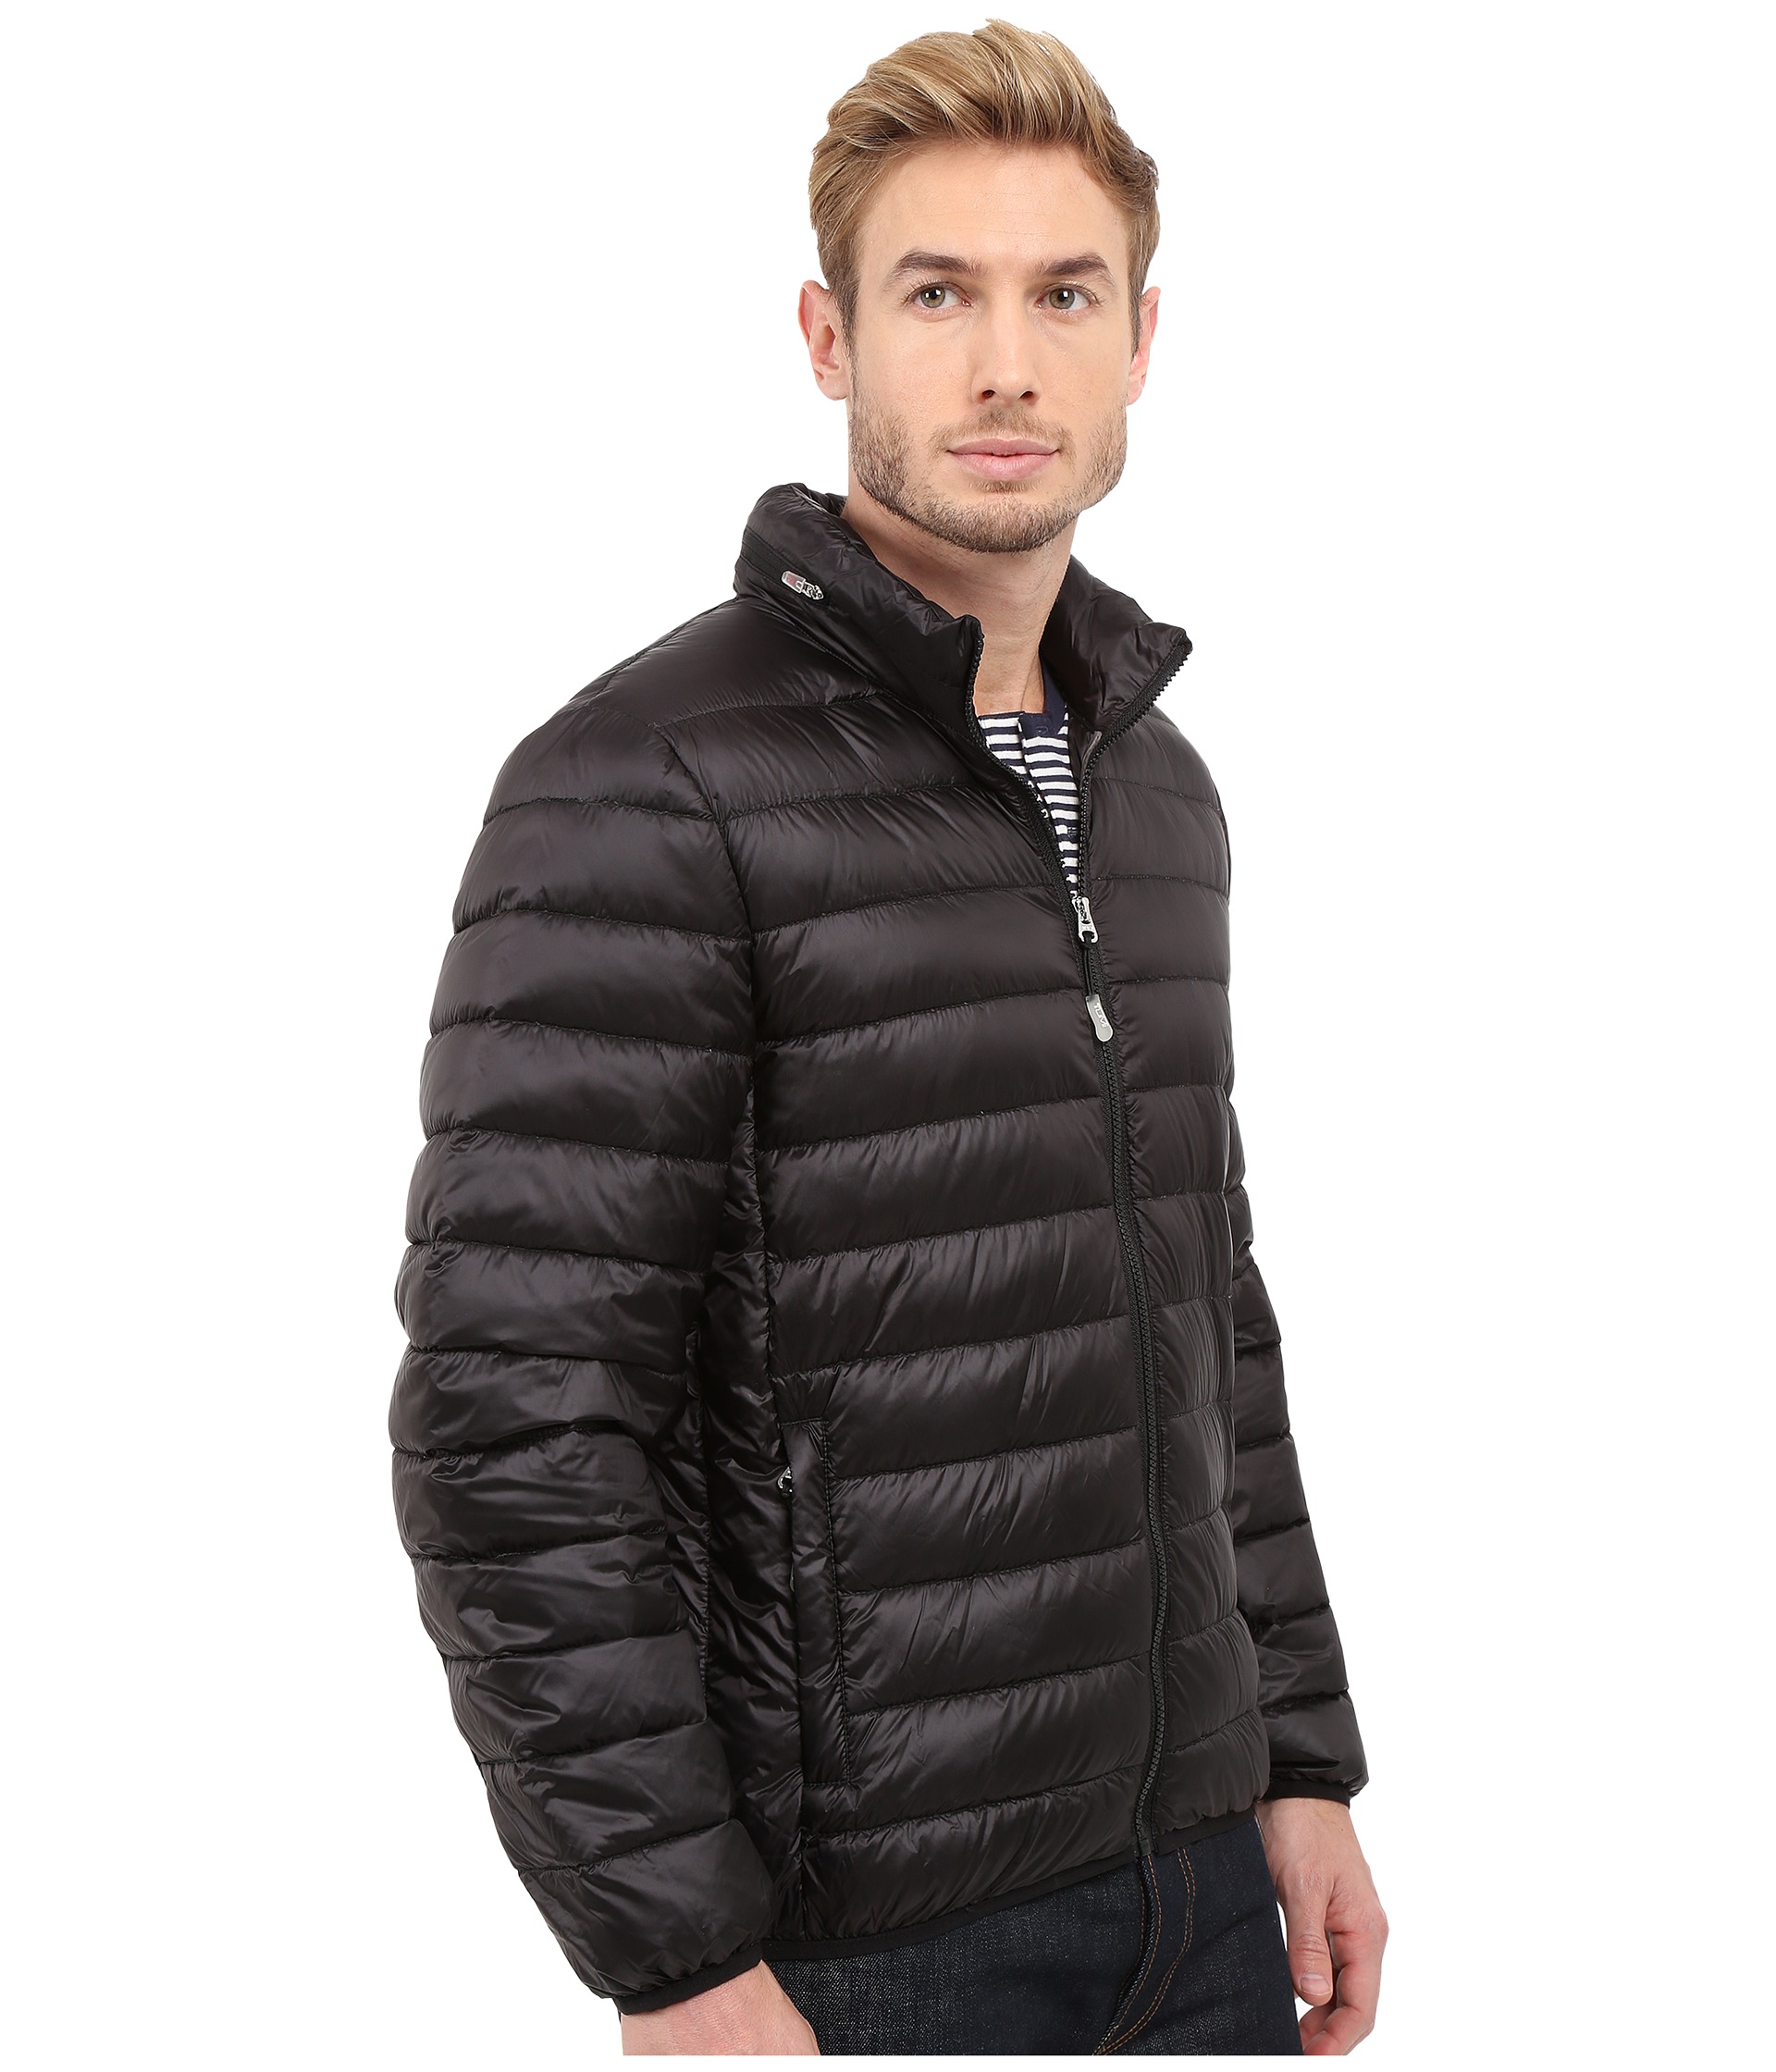 Tumi Patrol Packable Travel Puffer Jacket - Zappos.com Free Shipping ...